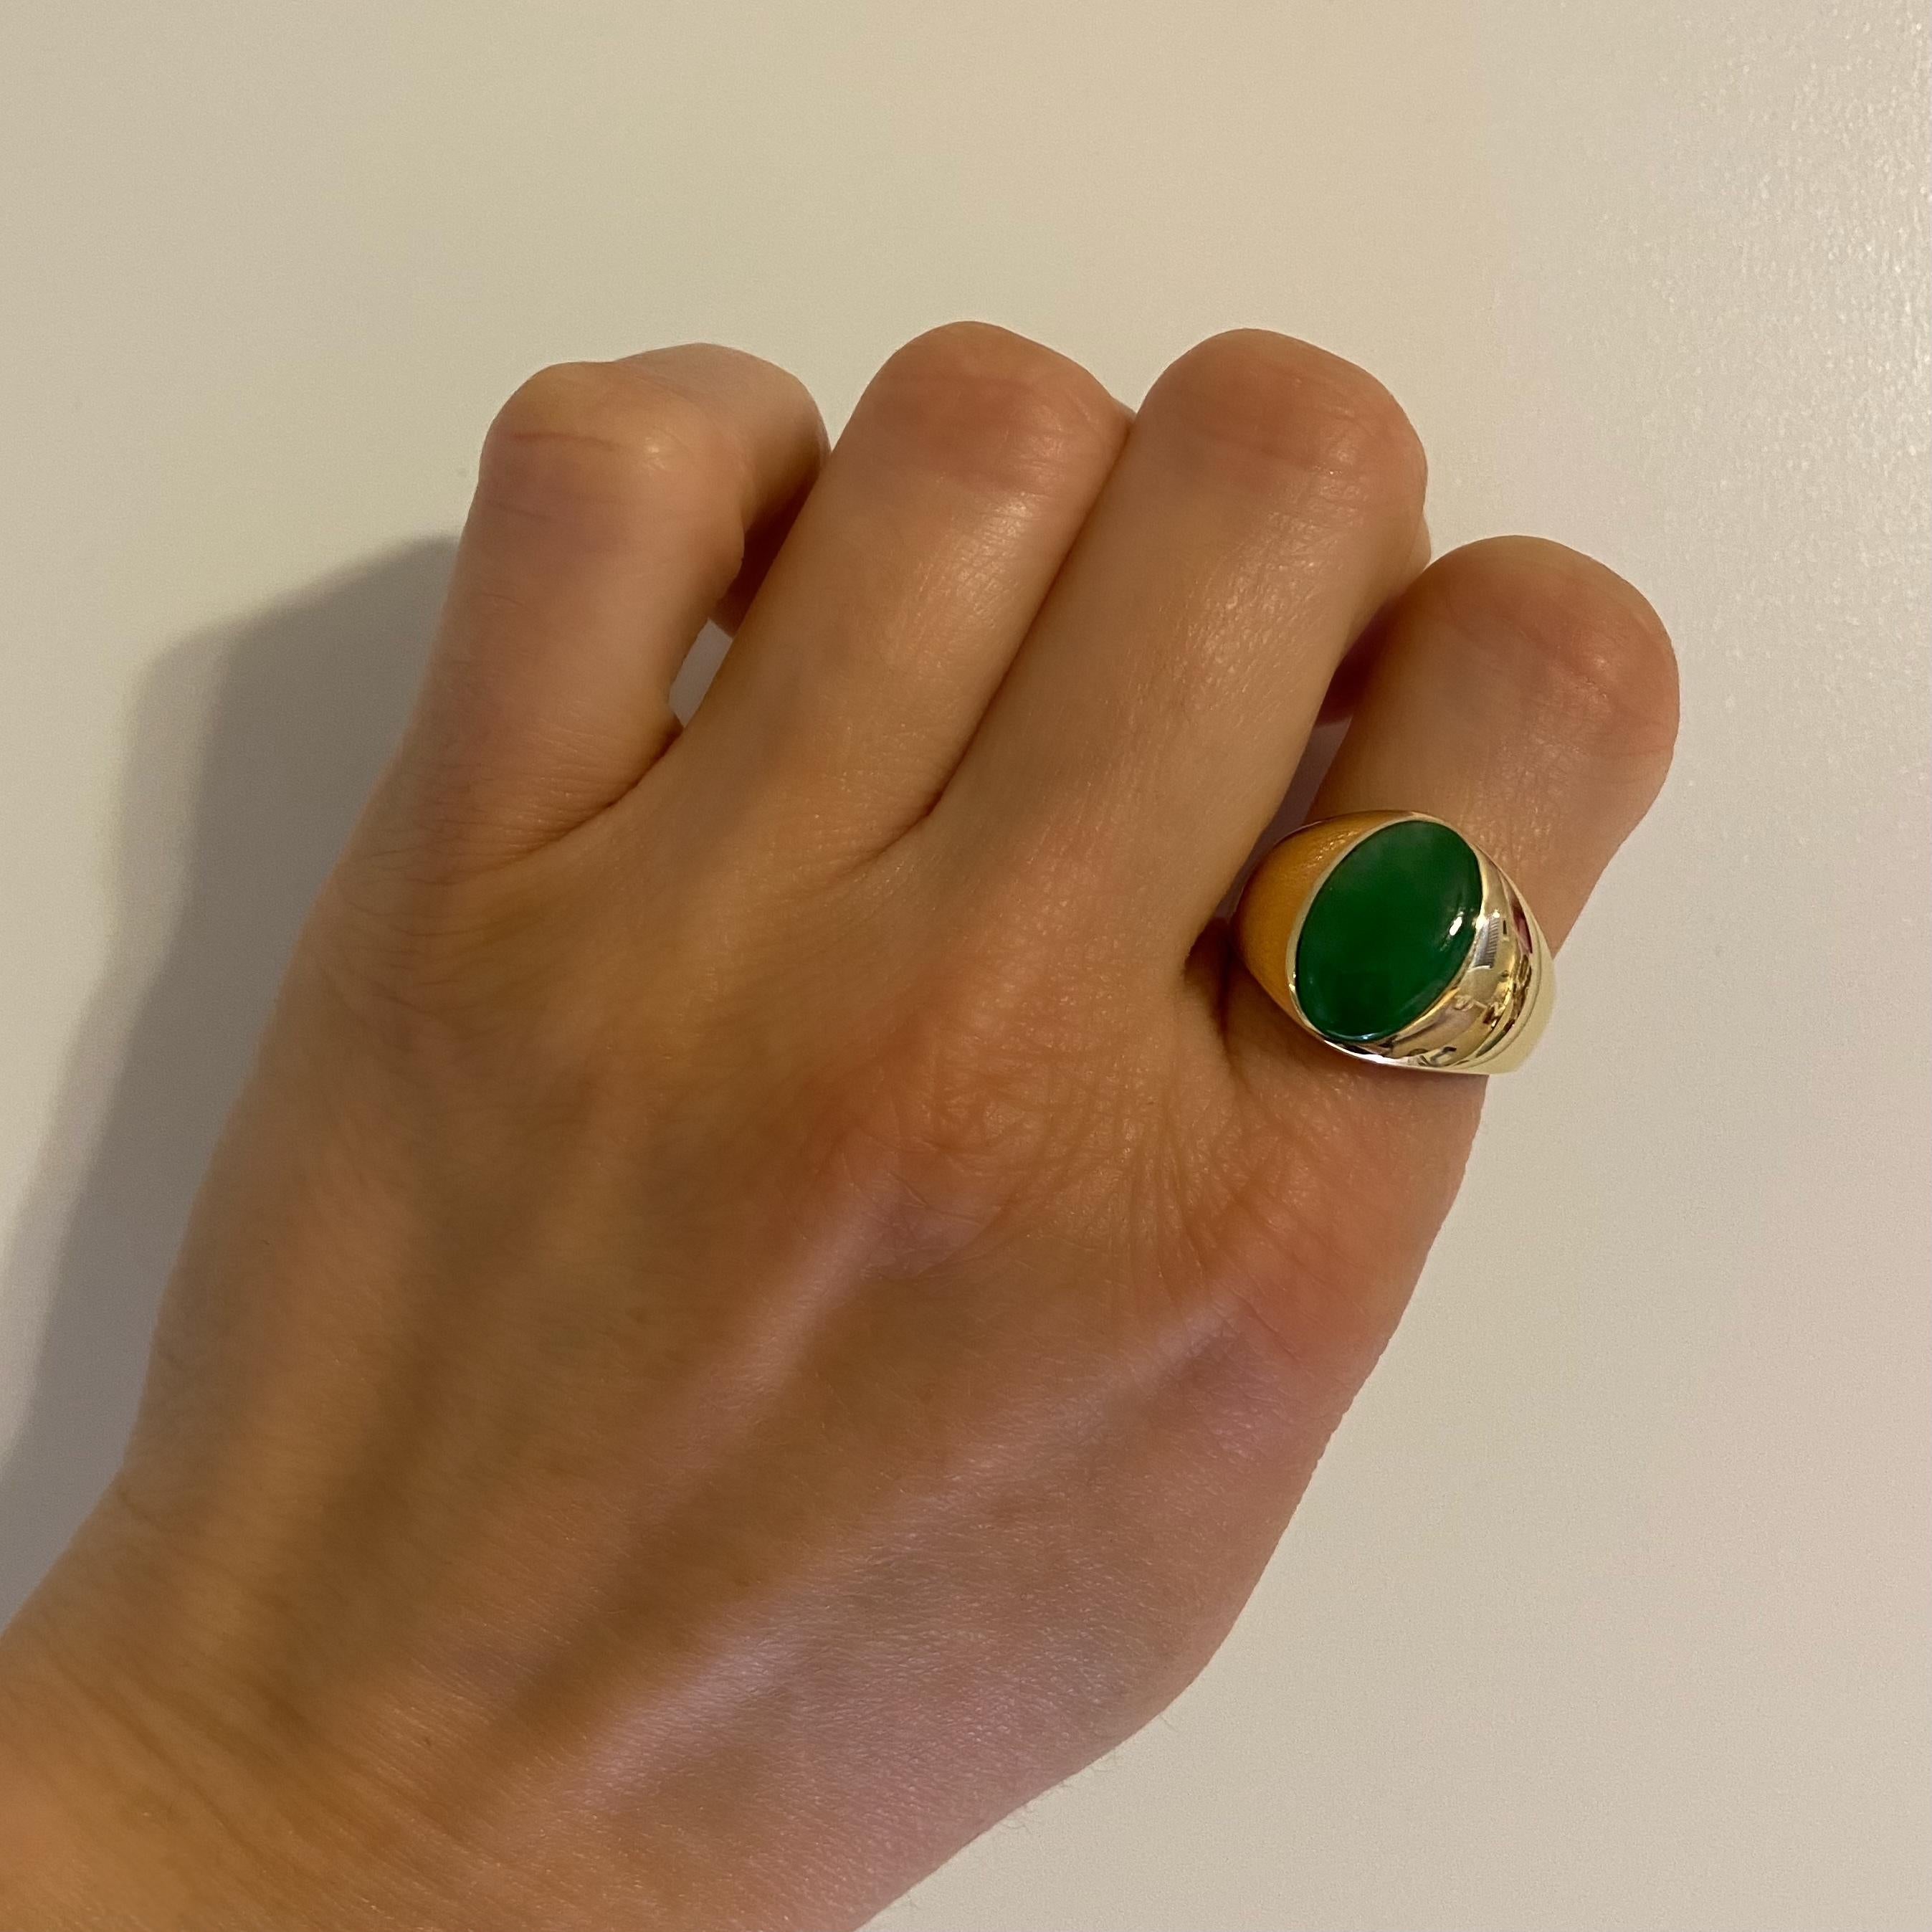 Handsome High Quality Men’s Gold Ring, securely set with a Cabochon Oval Jadeite Jade, hand crafted in 18 Karat Yellow Gold mounting. GIA #1216498224. Ring size 8.25, ring sizing available. Dimensions 0.89”w x 0.63”h x 1.05”d. In excellent